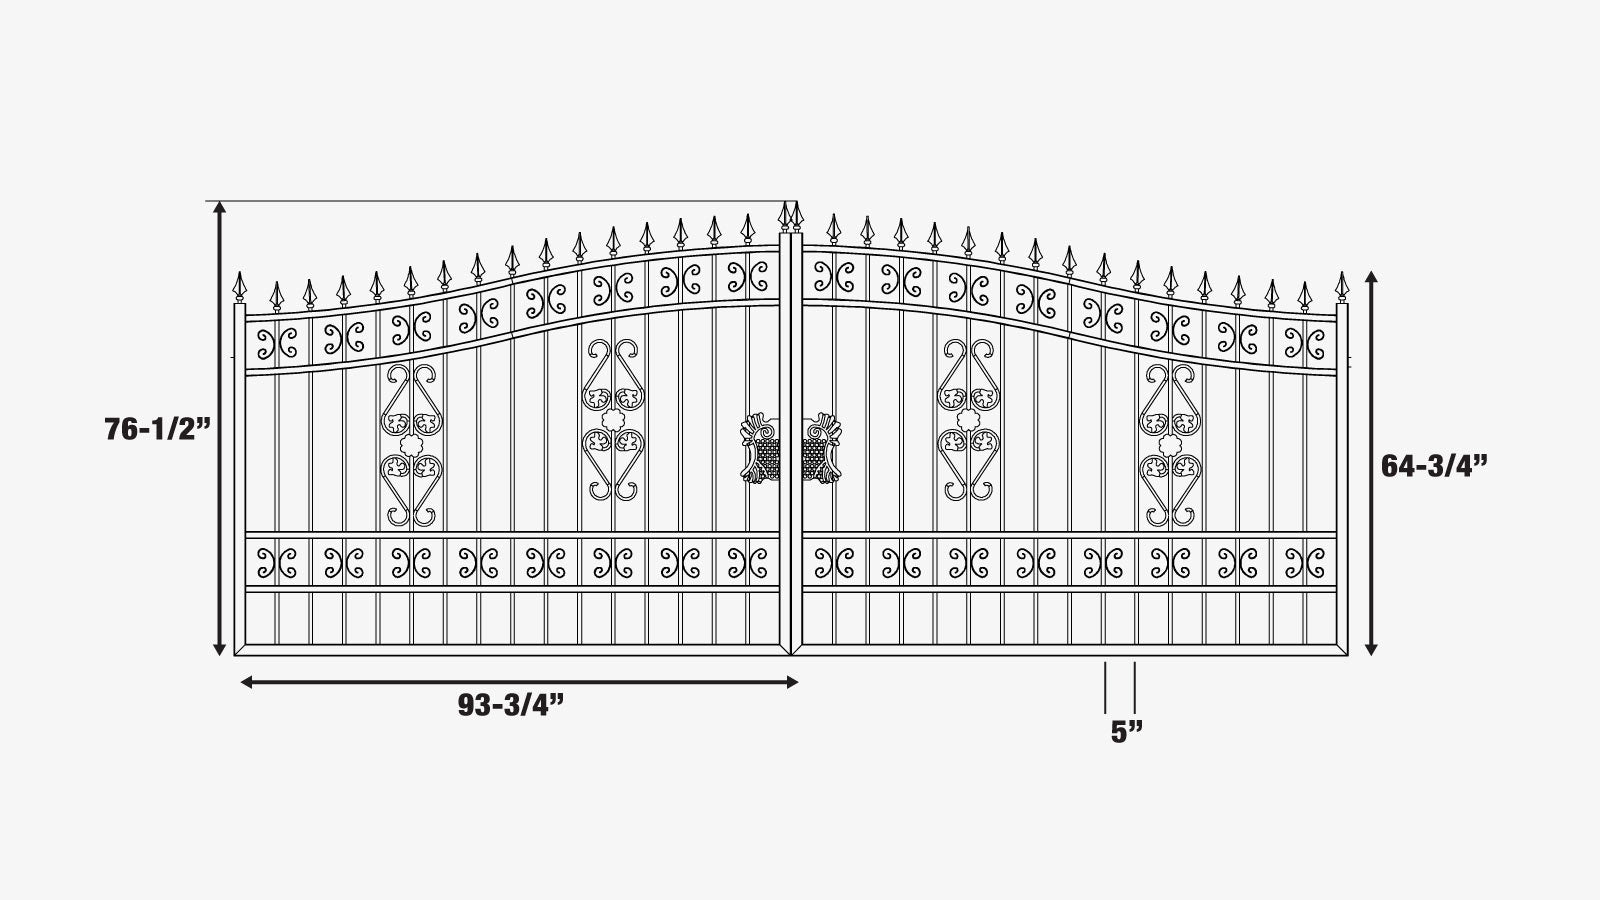 TMG Industrial 16-ft Bi-Parting Deluxe Wrought Iron Ornamental Gate, 100% Solid Forged Steel, Powder Coated, TMG-MG16-specifications-image